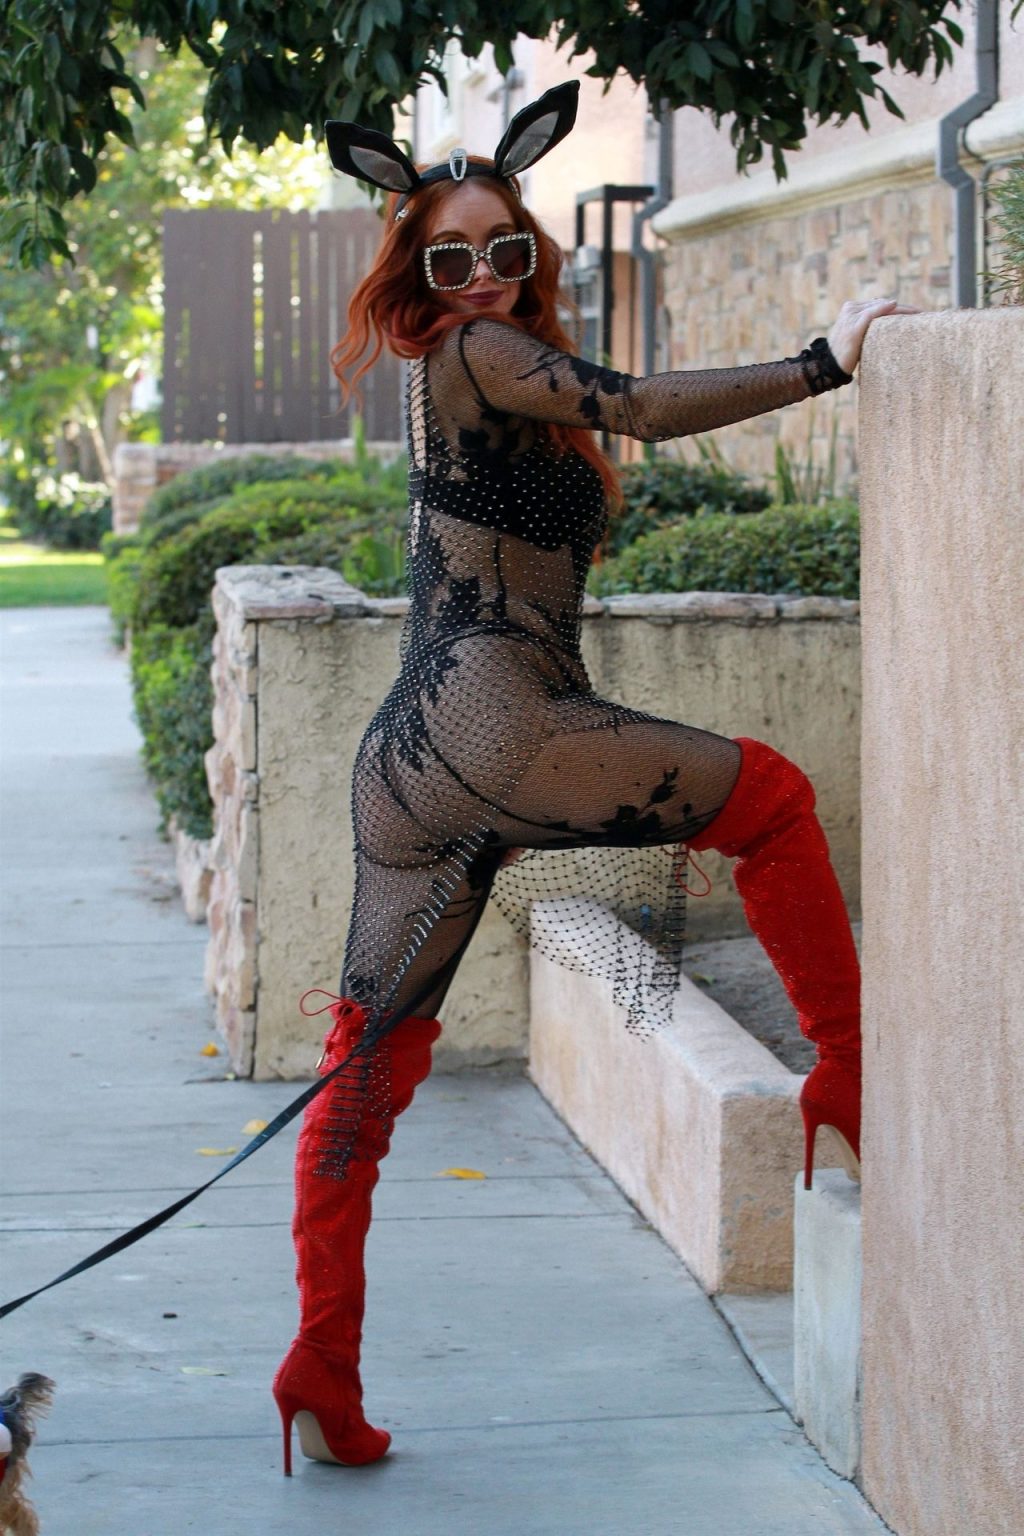 Phoebe Price Walks Her Dog in a Sexy Bunny Outfit ahead of Halloween (27 Photos)